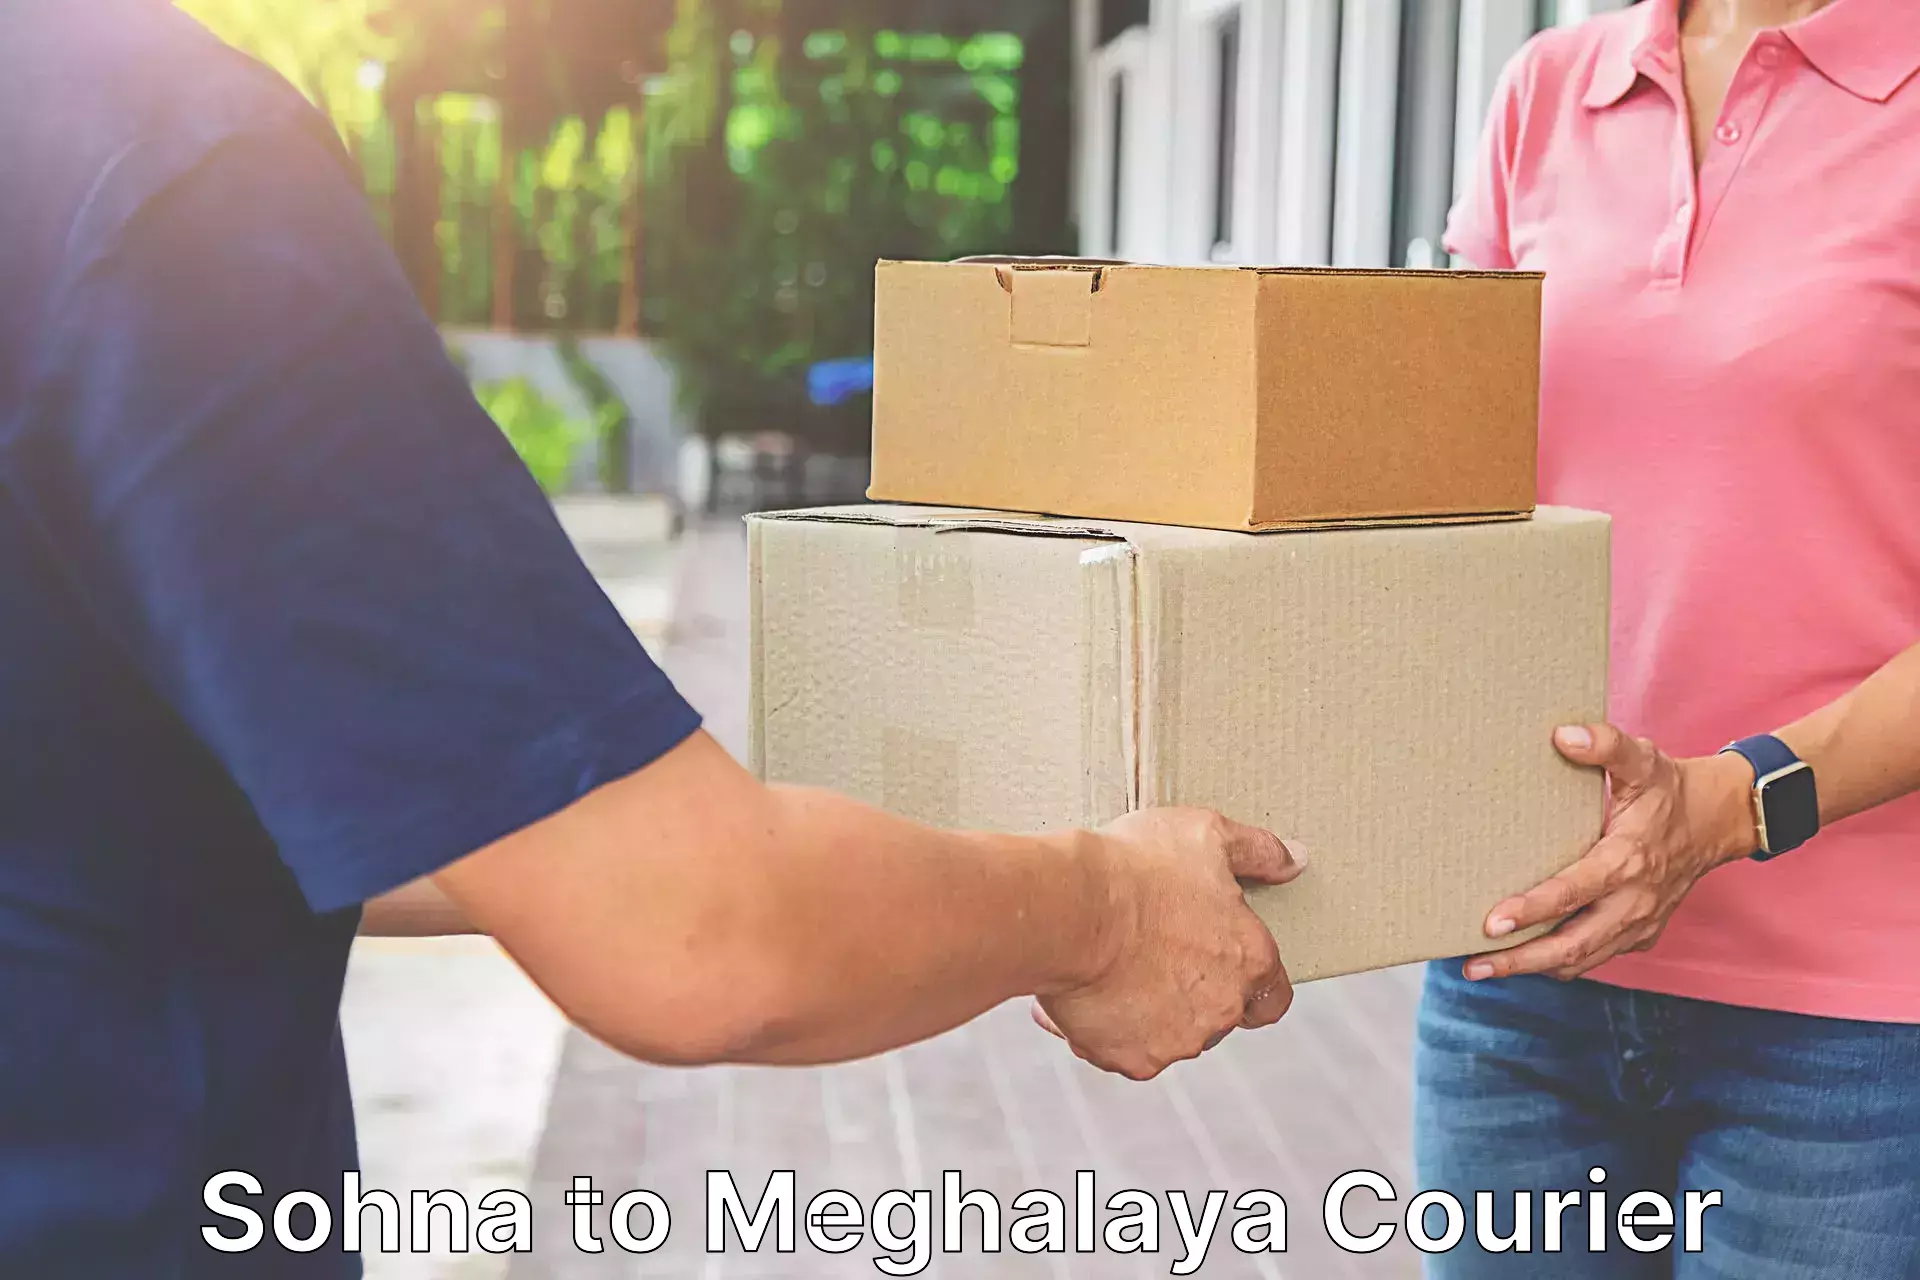 End-to-end delivery in Sohna to Meghalaya